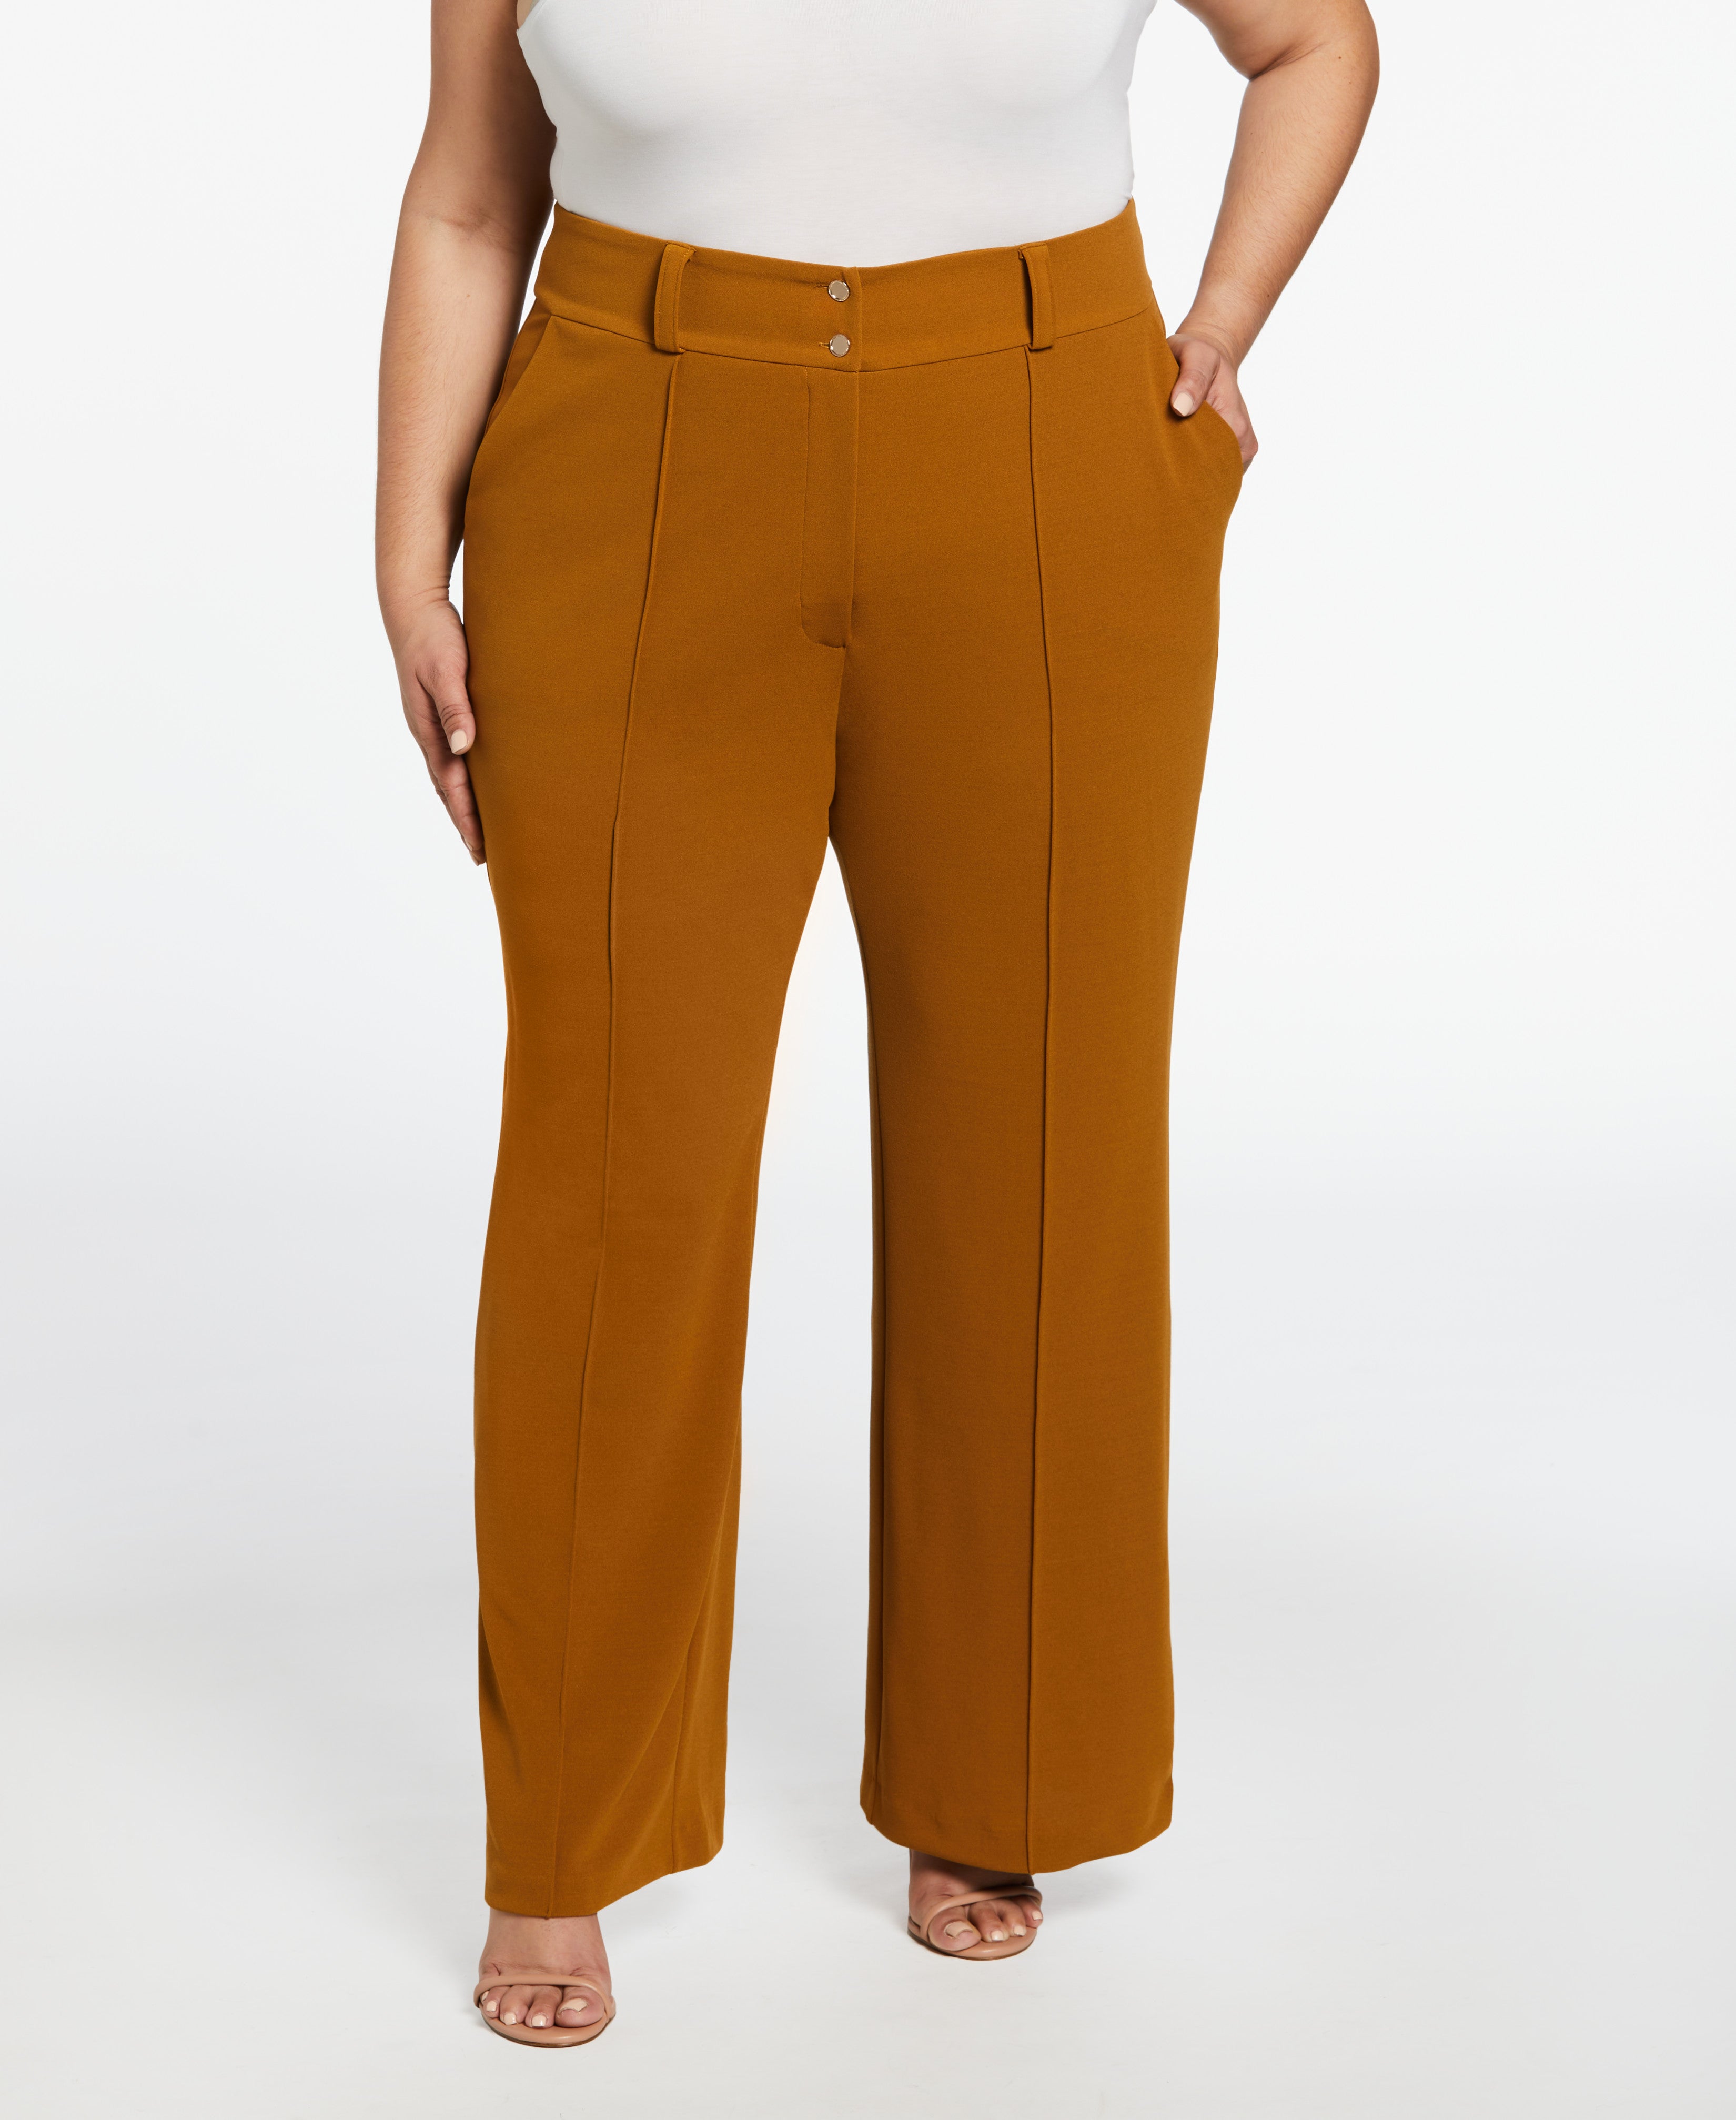 SOLD OUT! CLOSEOUT CLEARANCE! Plus Size Brown Wide Leg Palazzo Pants in  Slinky, Velvet or Cotton Fabric XL 1x 2x 3x 4x